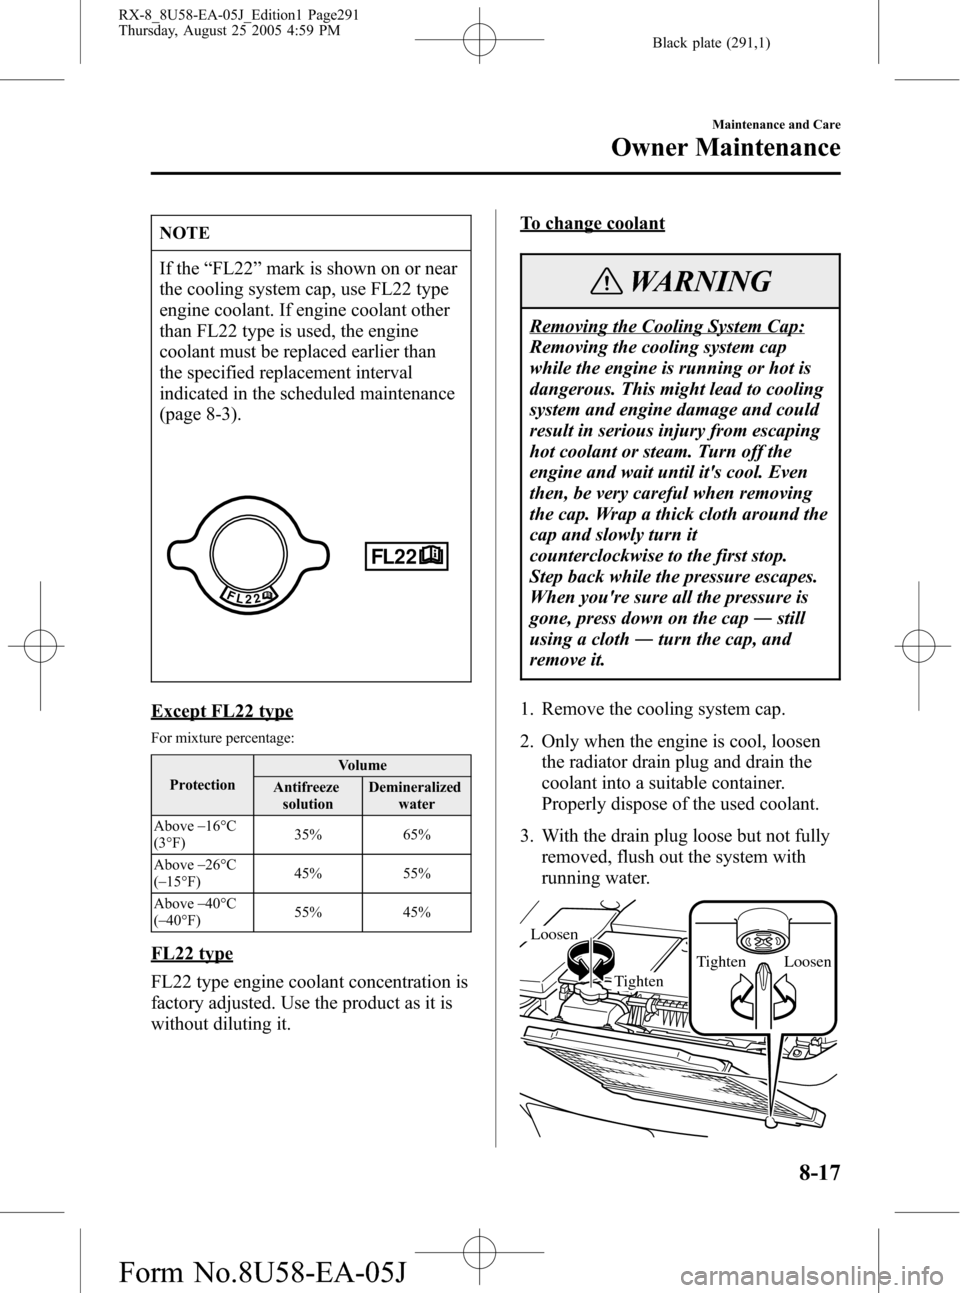 MAZDA MODEL RX 8 2006  Owners Manual (in English) Black plate (291,1)
NOTE
If the“FL22”mark is shown on or near
the cooling system cap, use FL22 type
engine coolant. If engine coolant other
than FL22 type is used, the engine
coolant must be repla